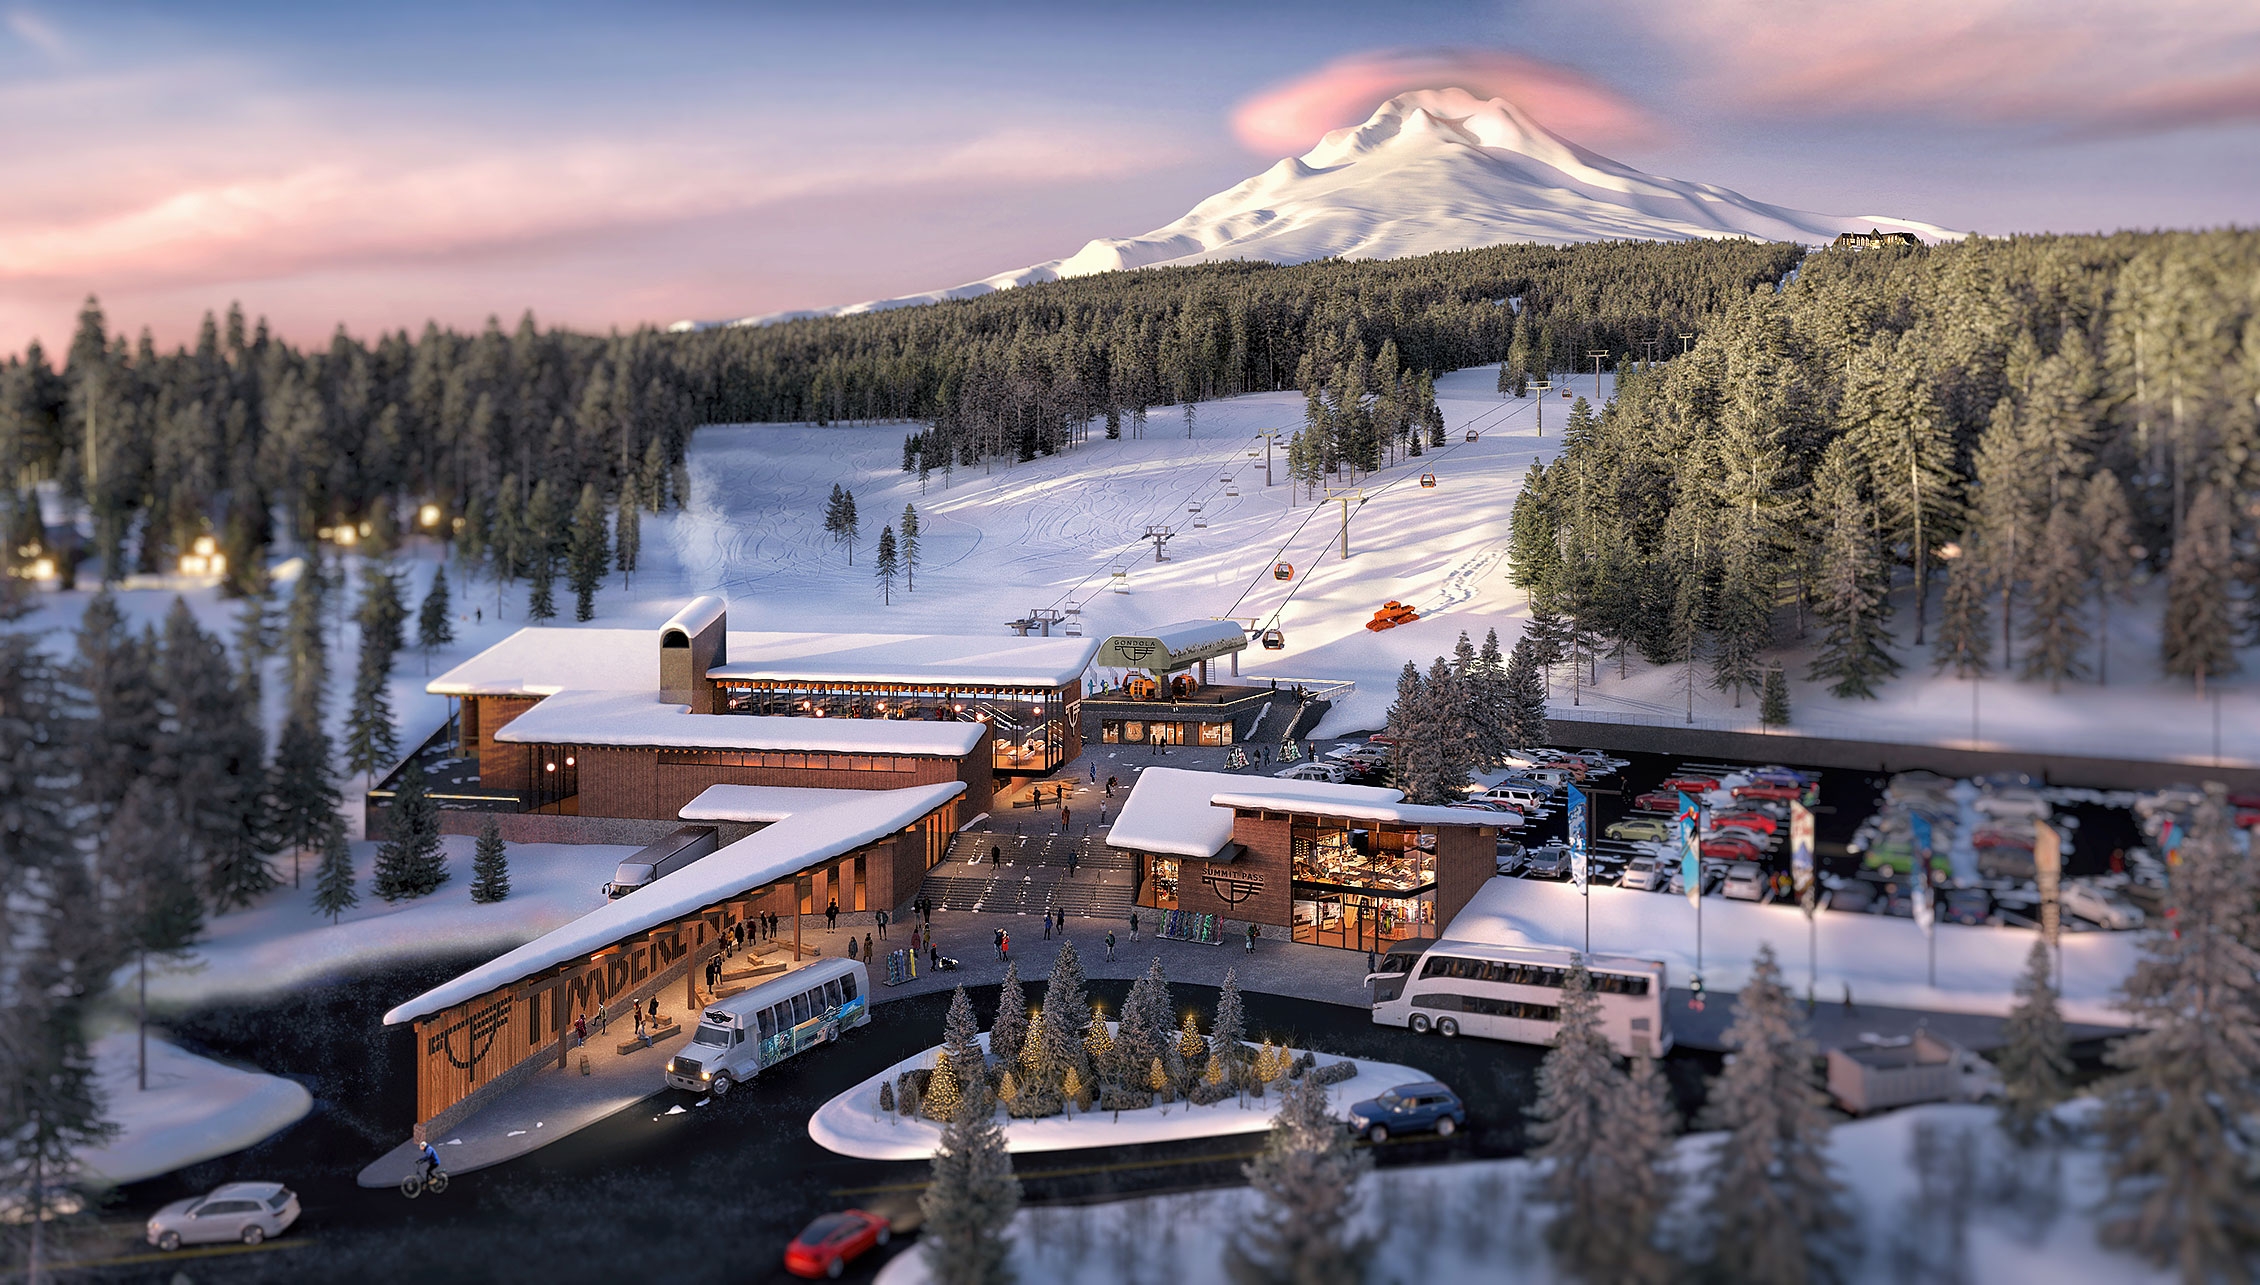 ARTIST RENDERING OF TIMBERLINE VISION FOR FUTURE AT SUMMIT PASS